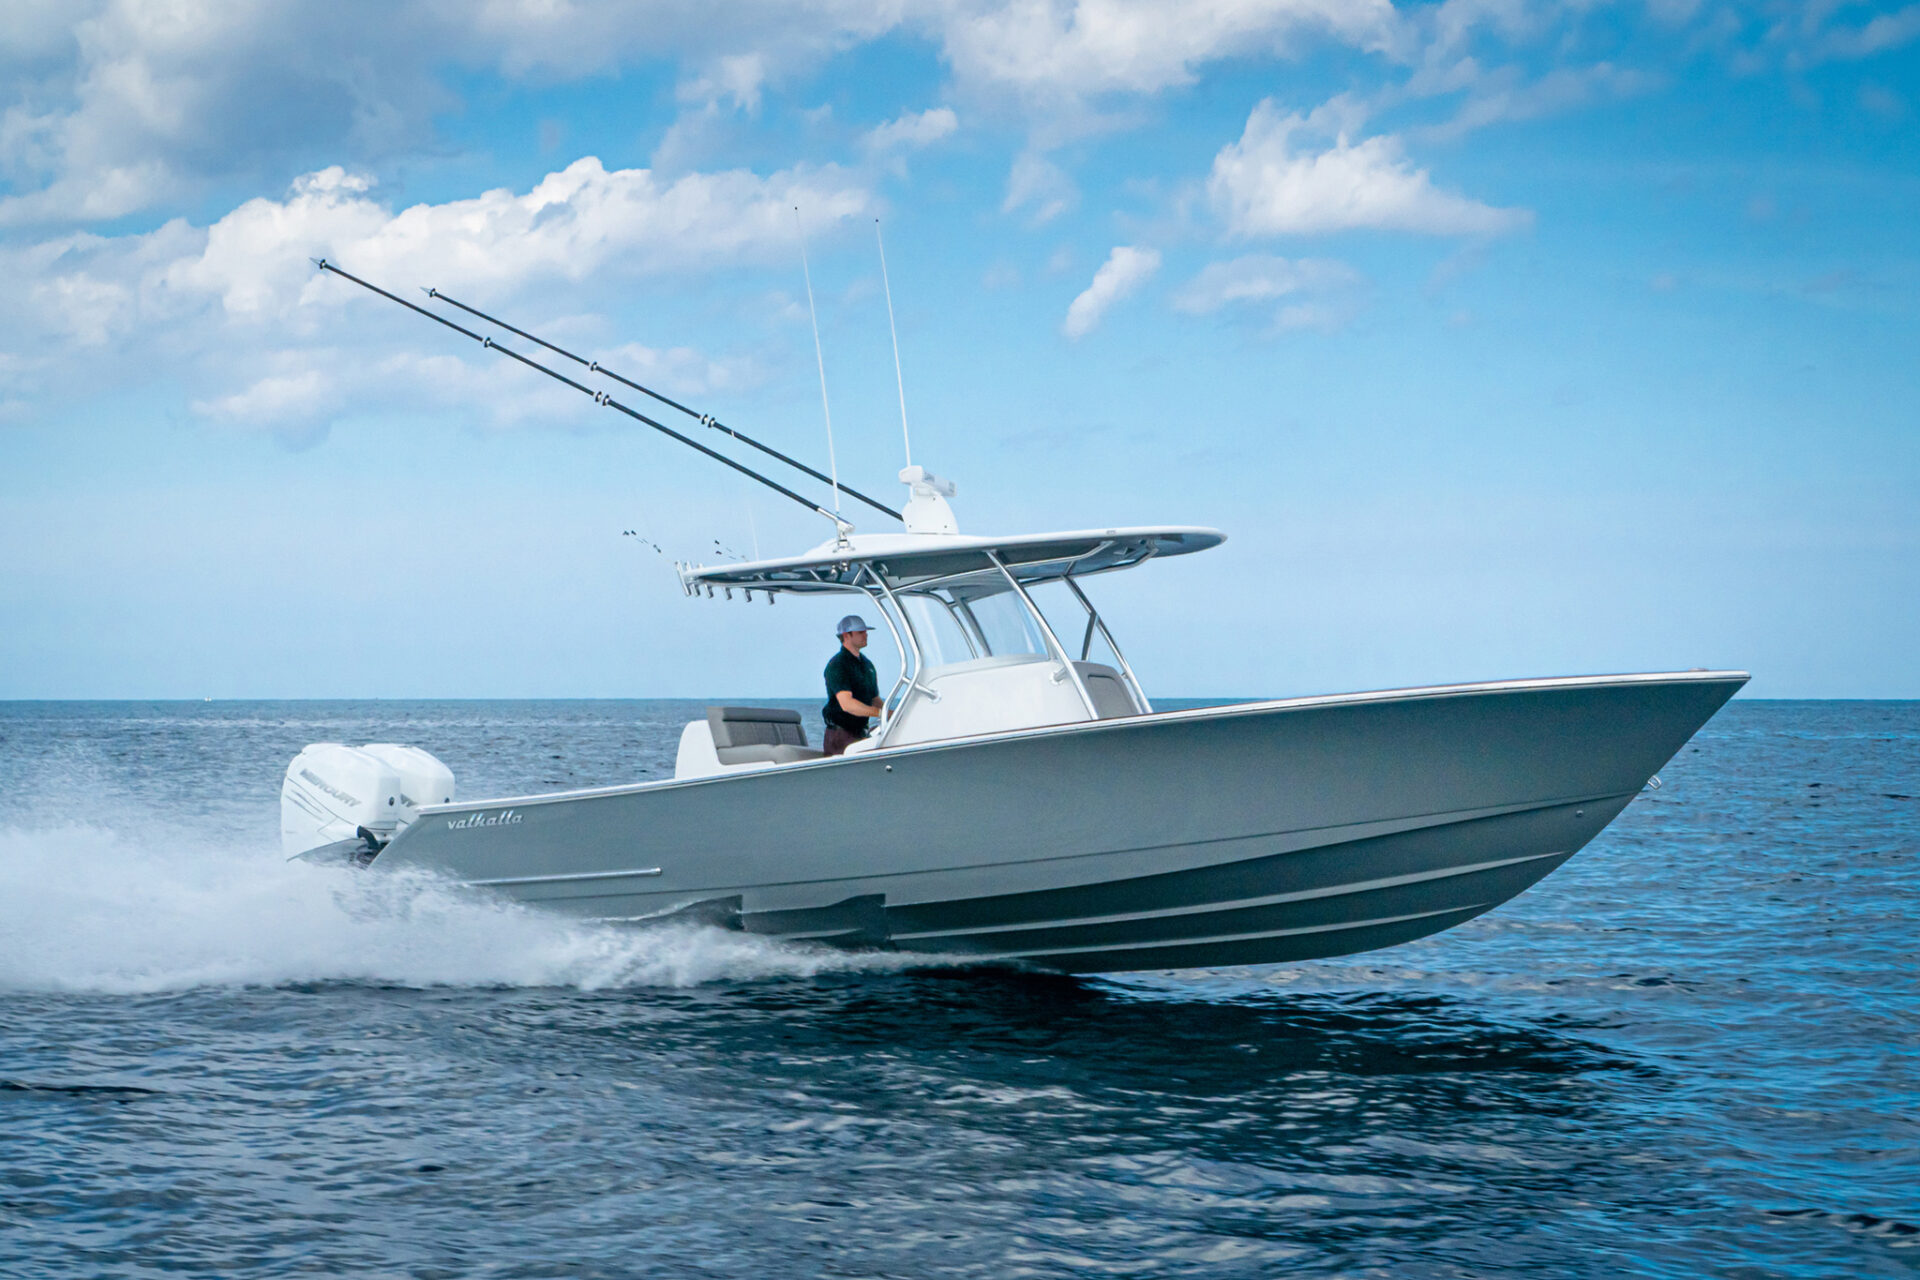 BEGINNERS GUIDE TO BUYING A BOAT